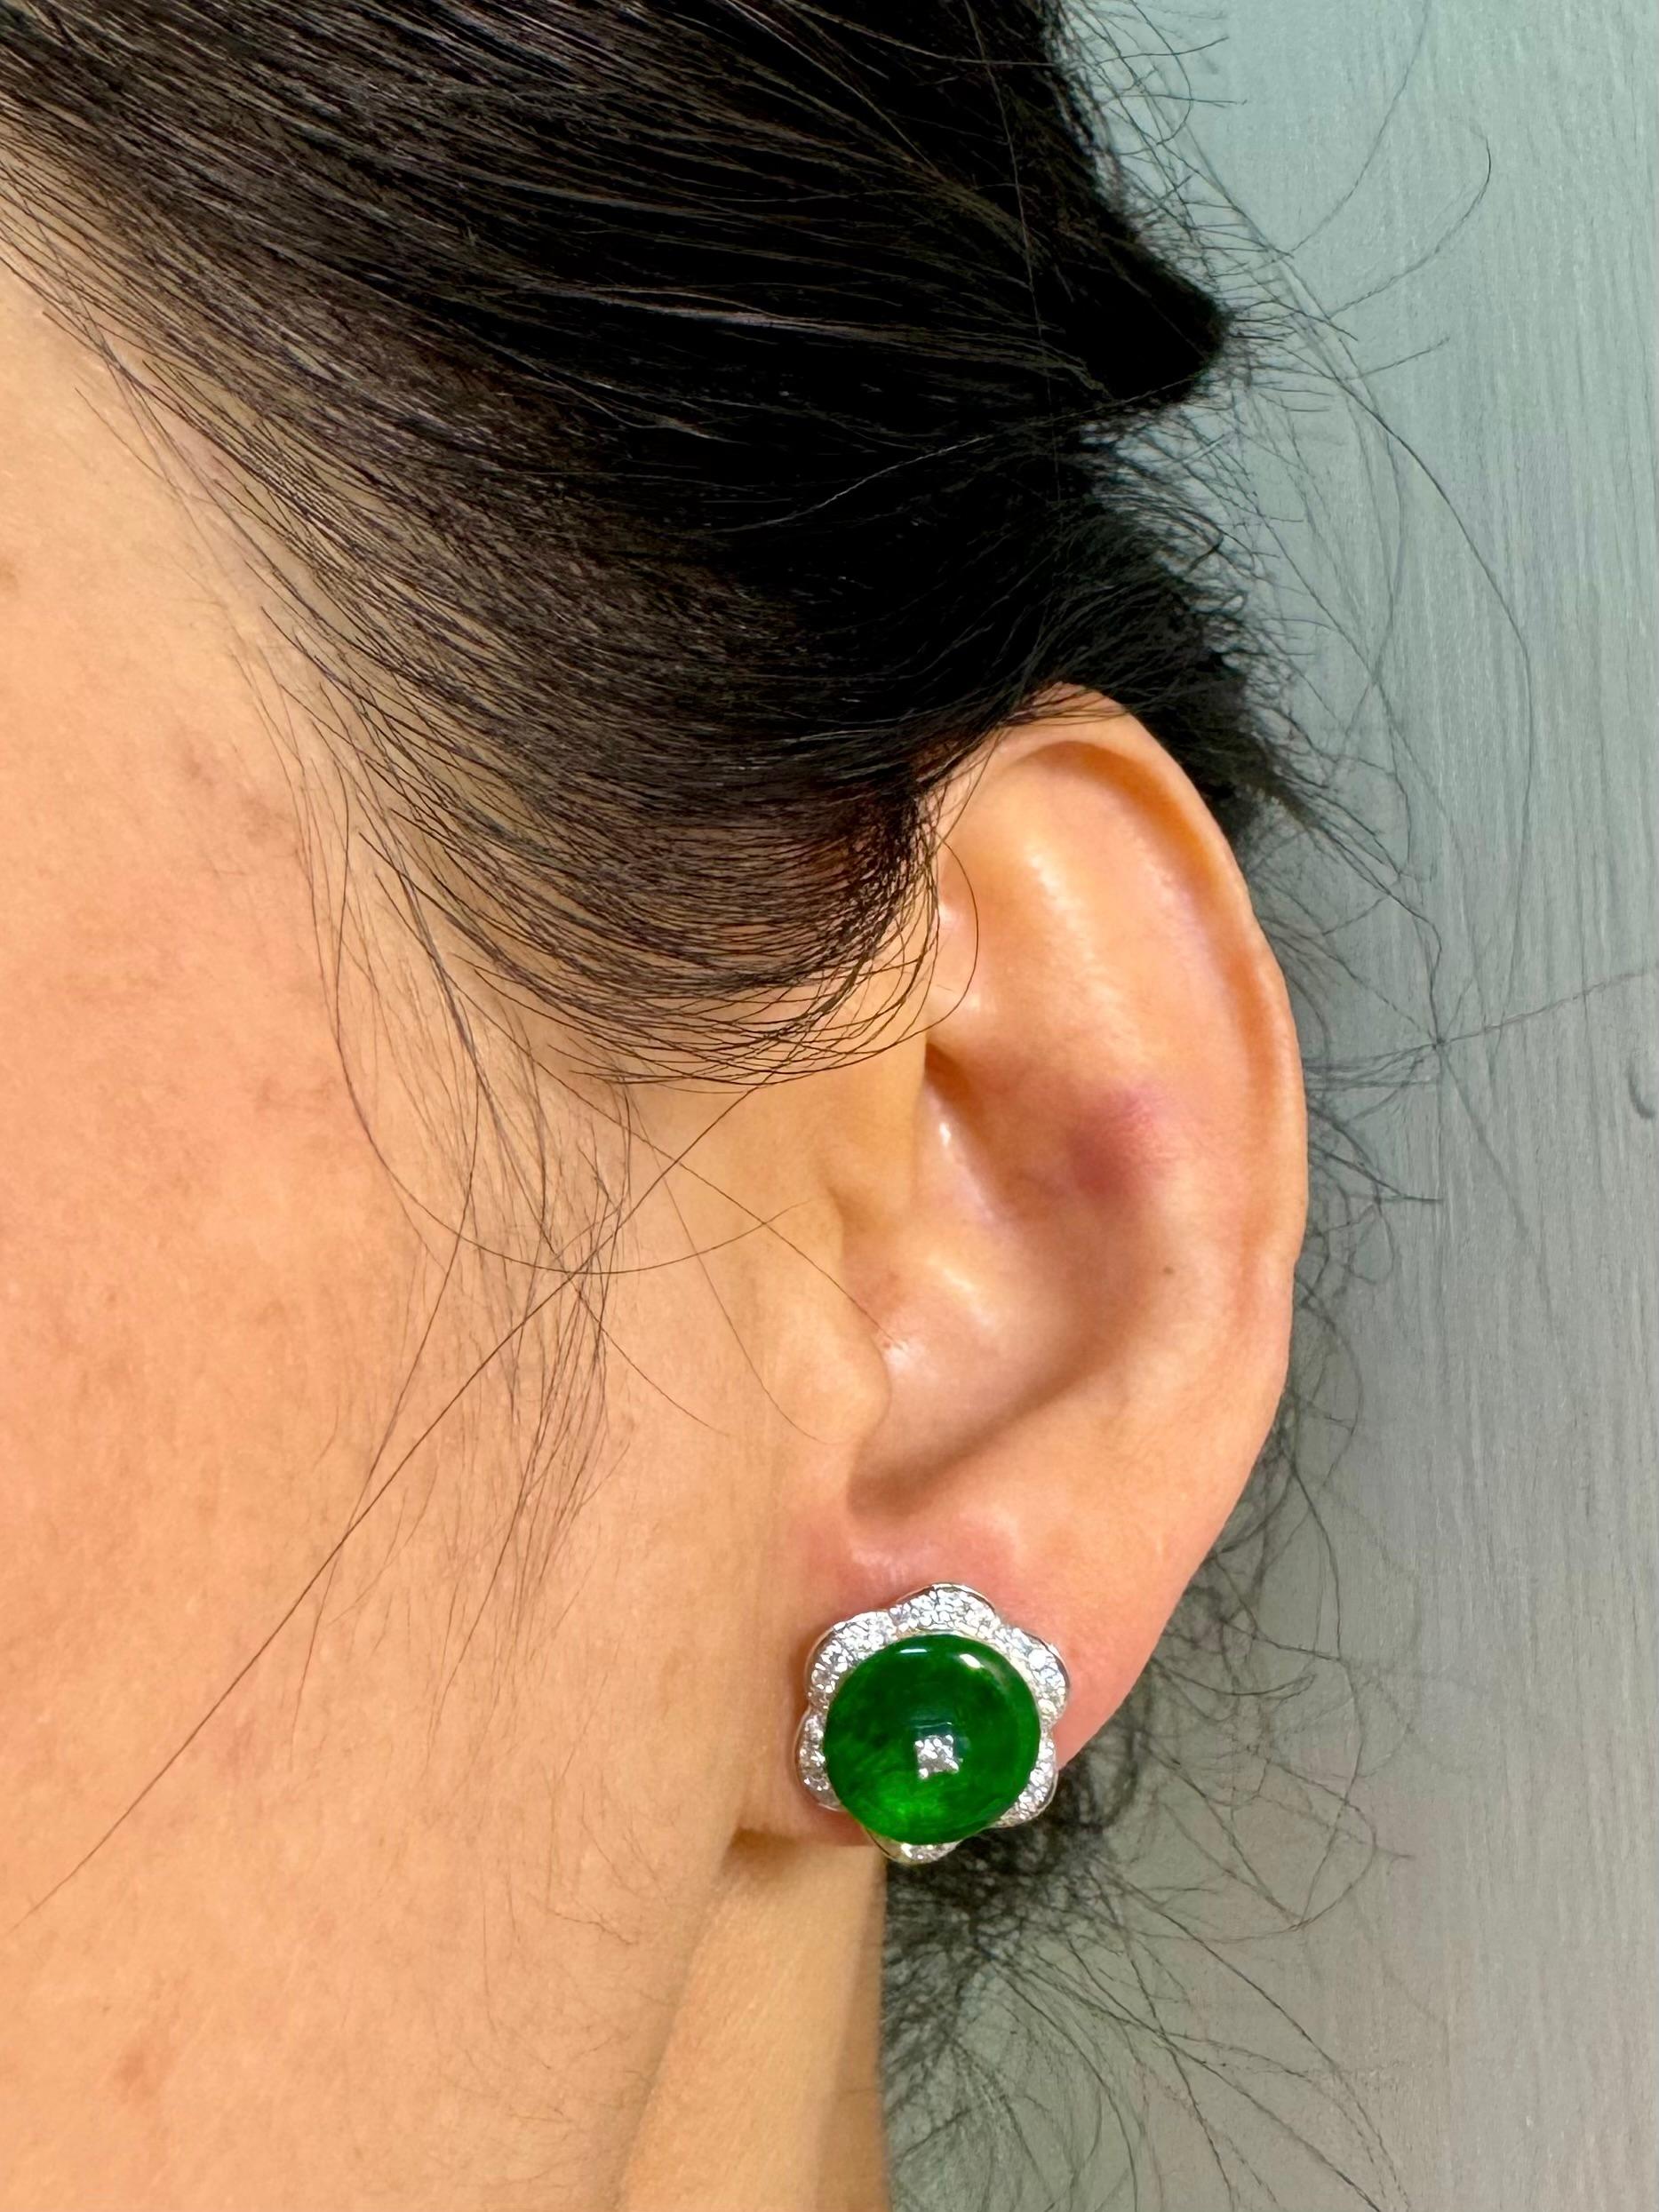 Please check out the HD video! Here is a nice pair of apple green Jade earrings. The diameter is about 15.3mm each. The earrings are set in 18k white gold and diamonds. There are approximately 0.55Cts of white diamonds that make up the wavy halo.